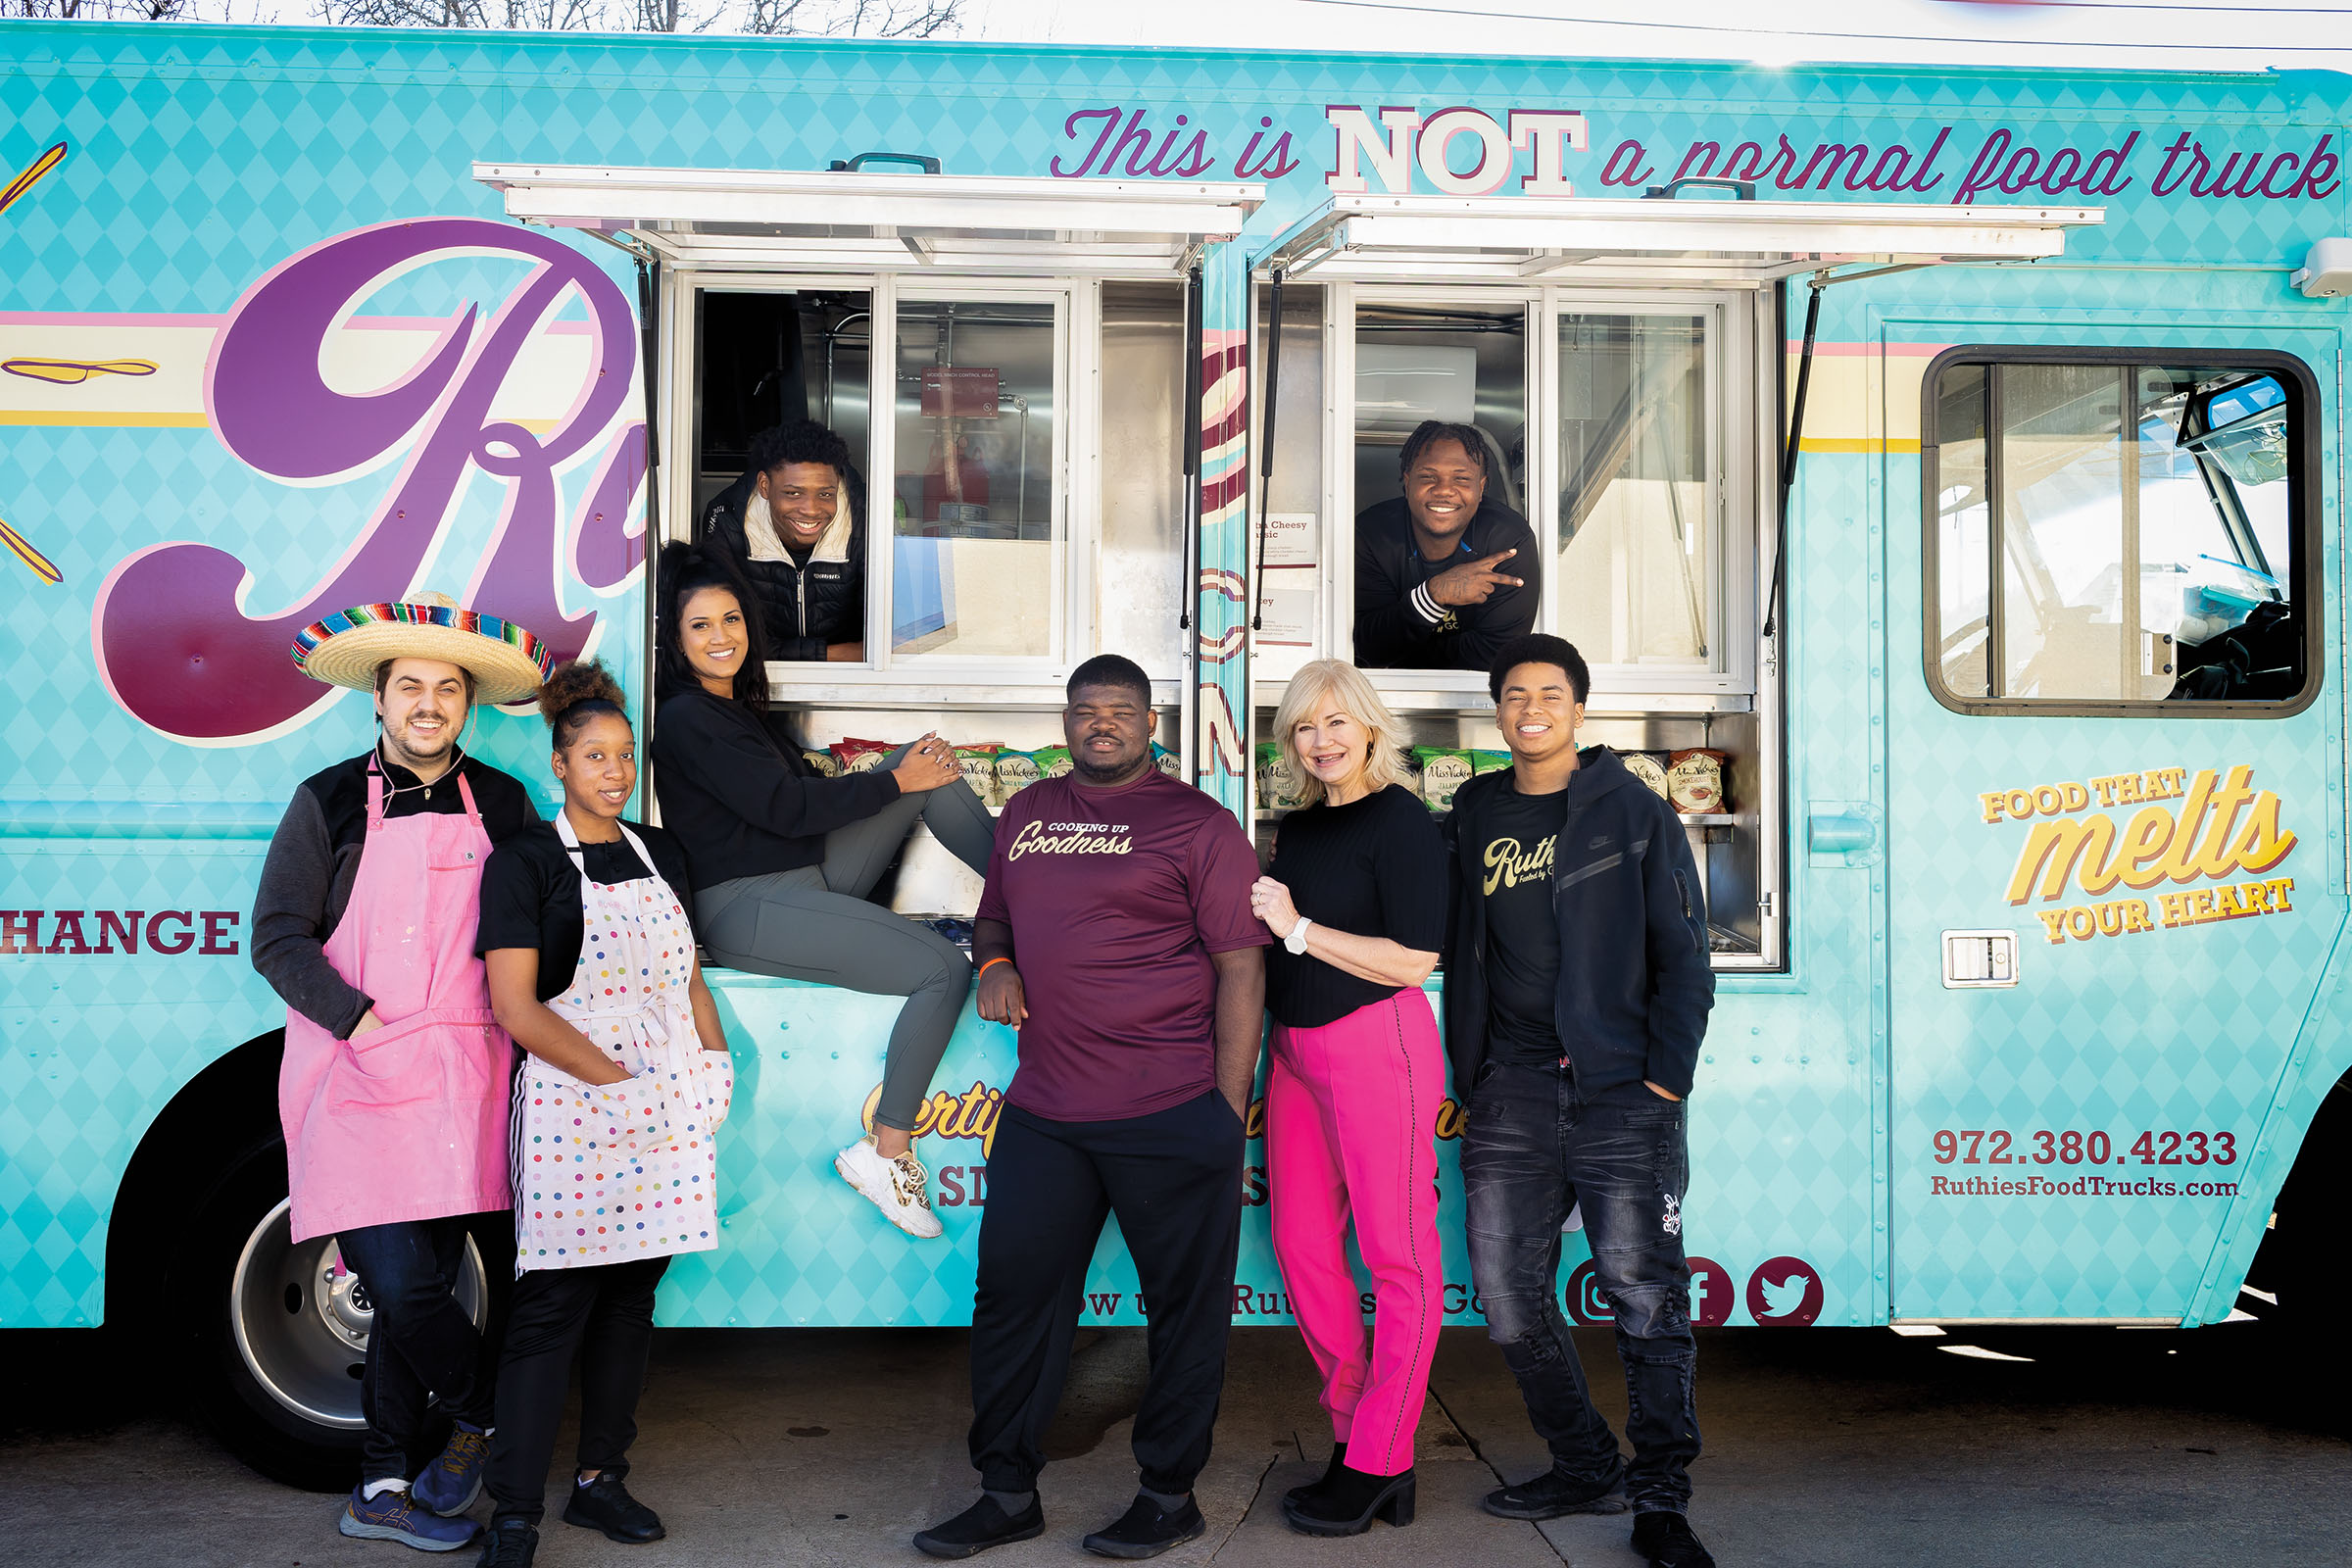 A group of people stand outside of a turquoise food truck